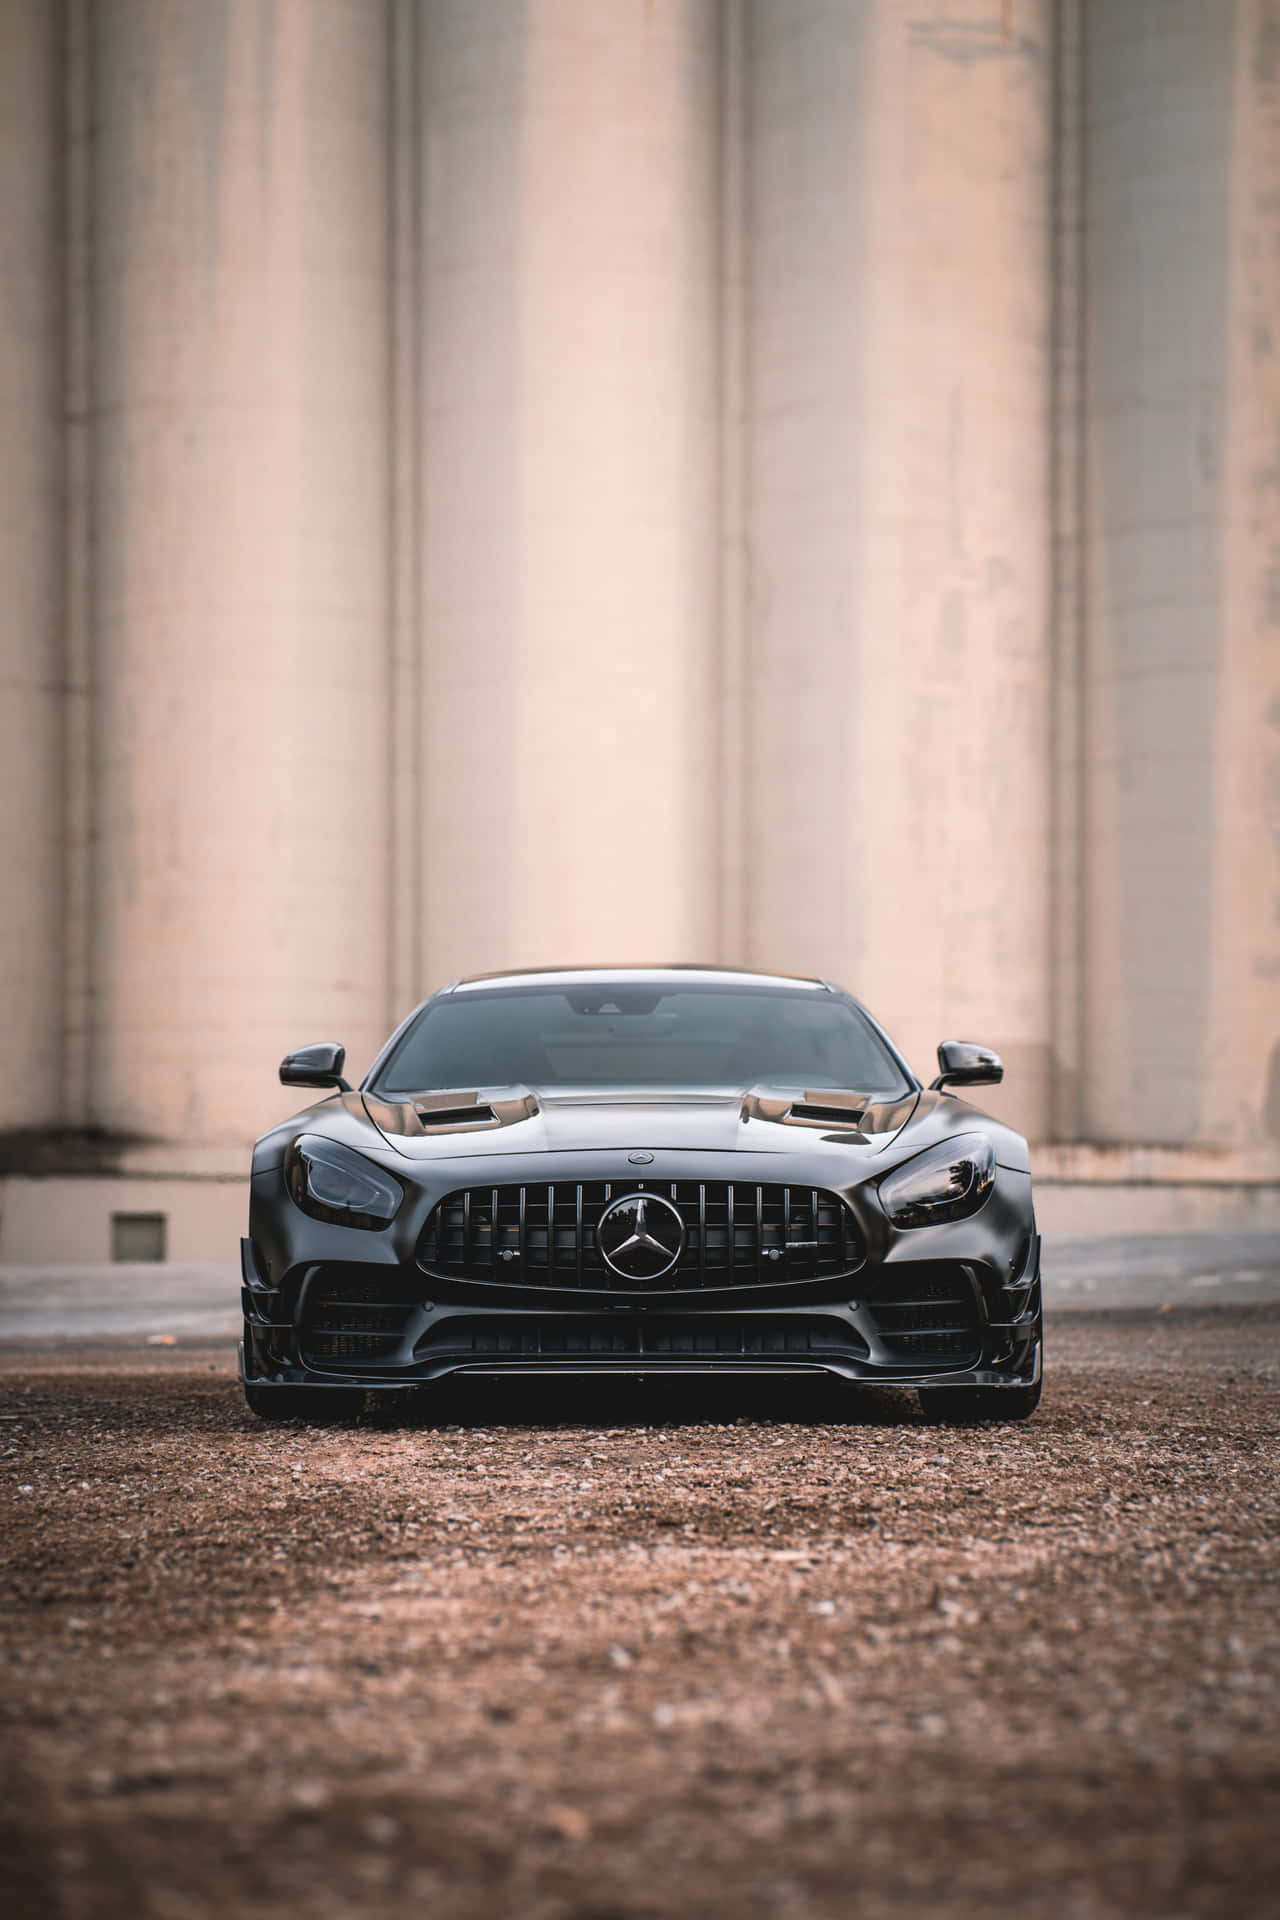 Fundode Tela Brown Aesthetic Android Black Amg Gt-r.